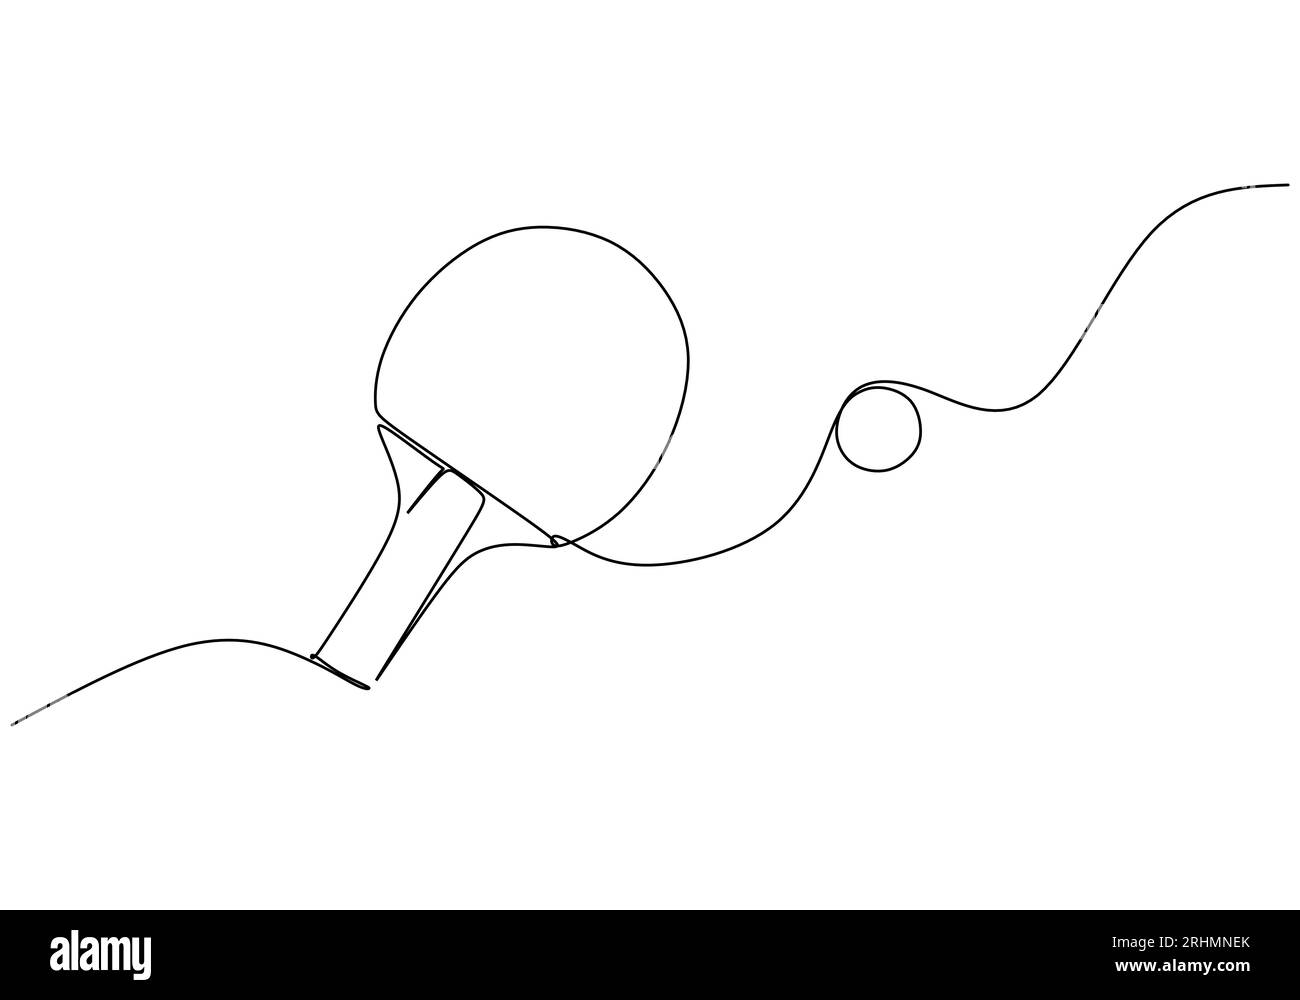 Table Tennis Racket One Line Drawing Continuous Hand Drawn Sport Theme Stock Vector